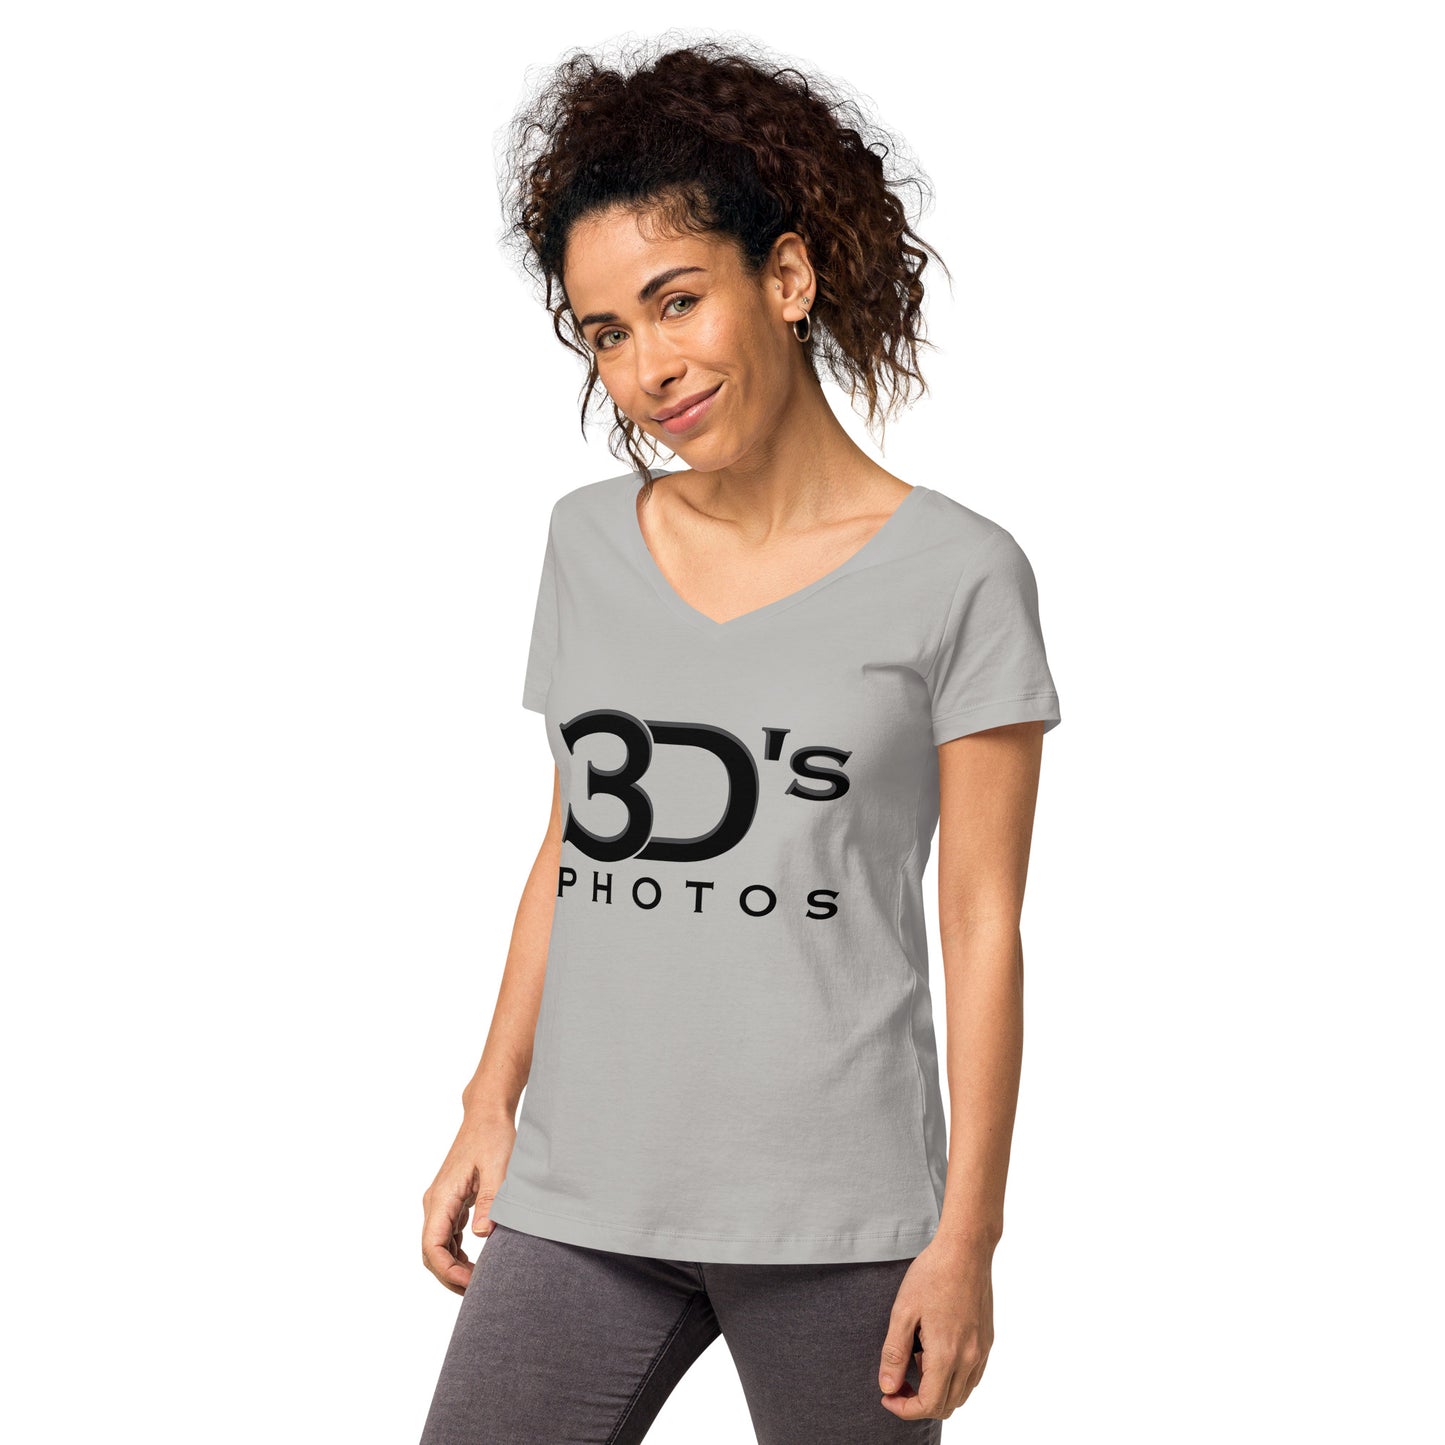 3D's Photos Women’s fitted v-neck t-shirt